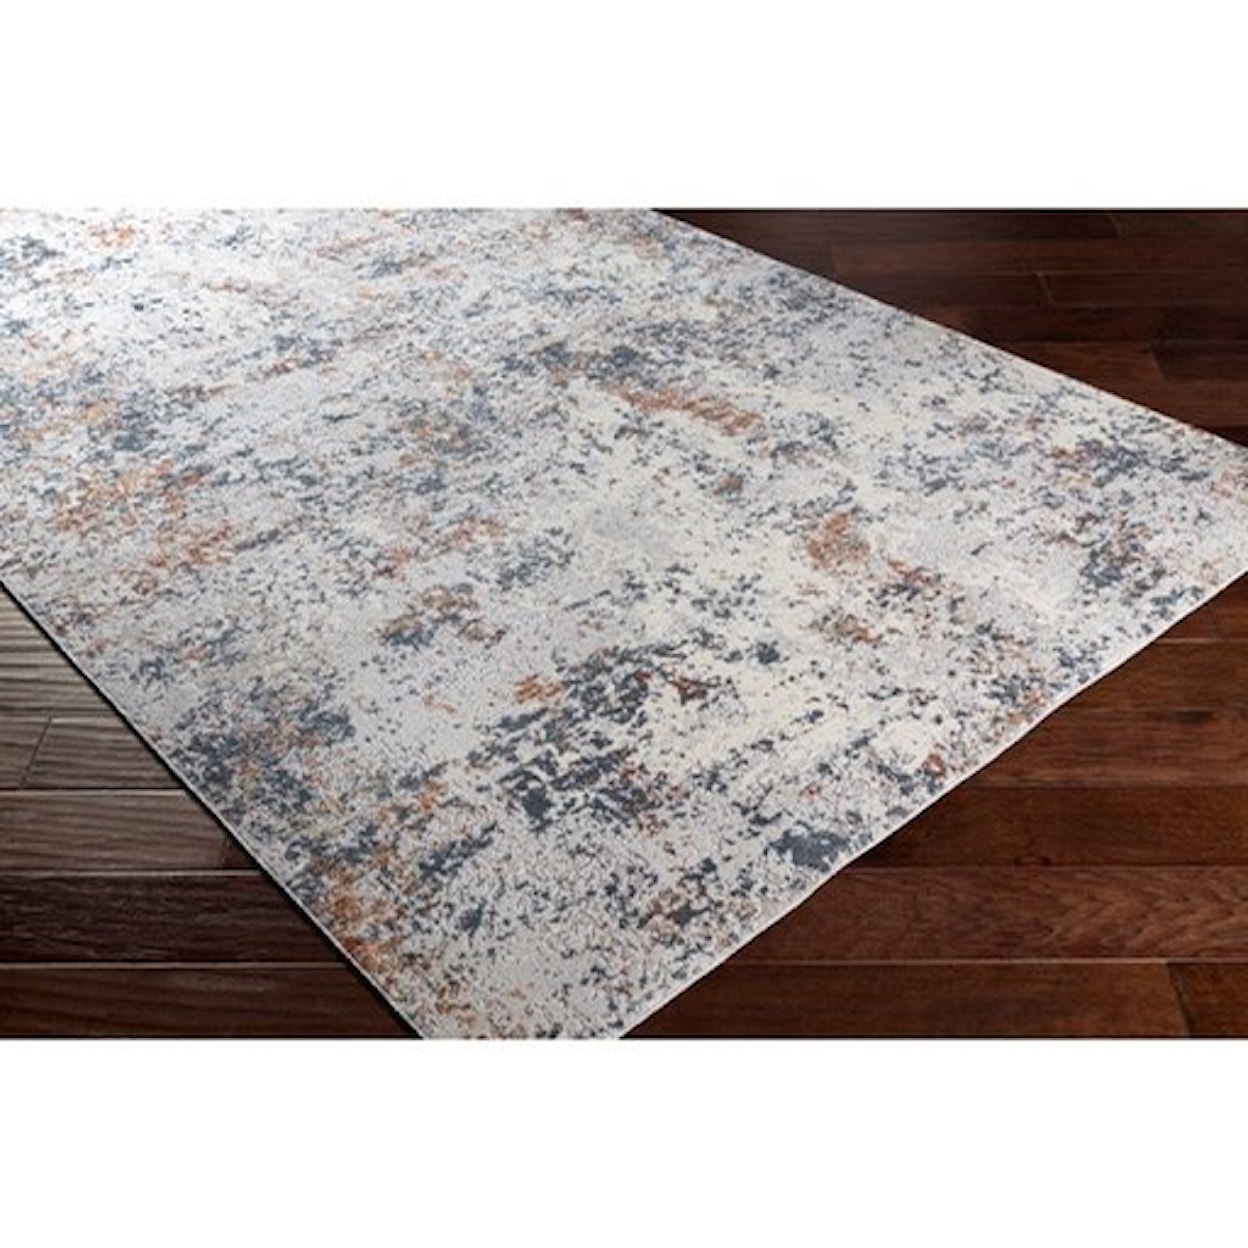 Ruby-Gordon Accents Norland 2' x 3' Rug